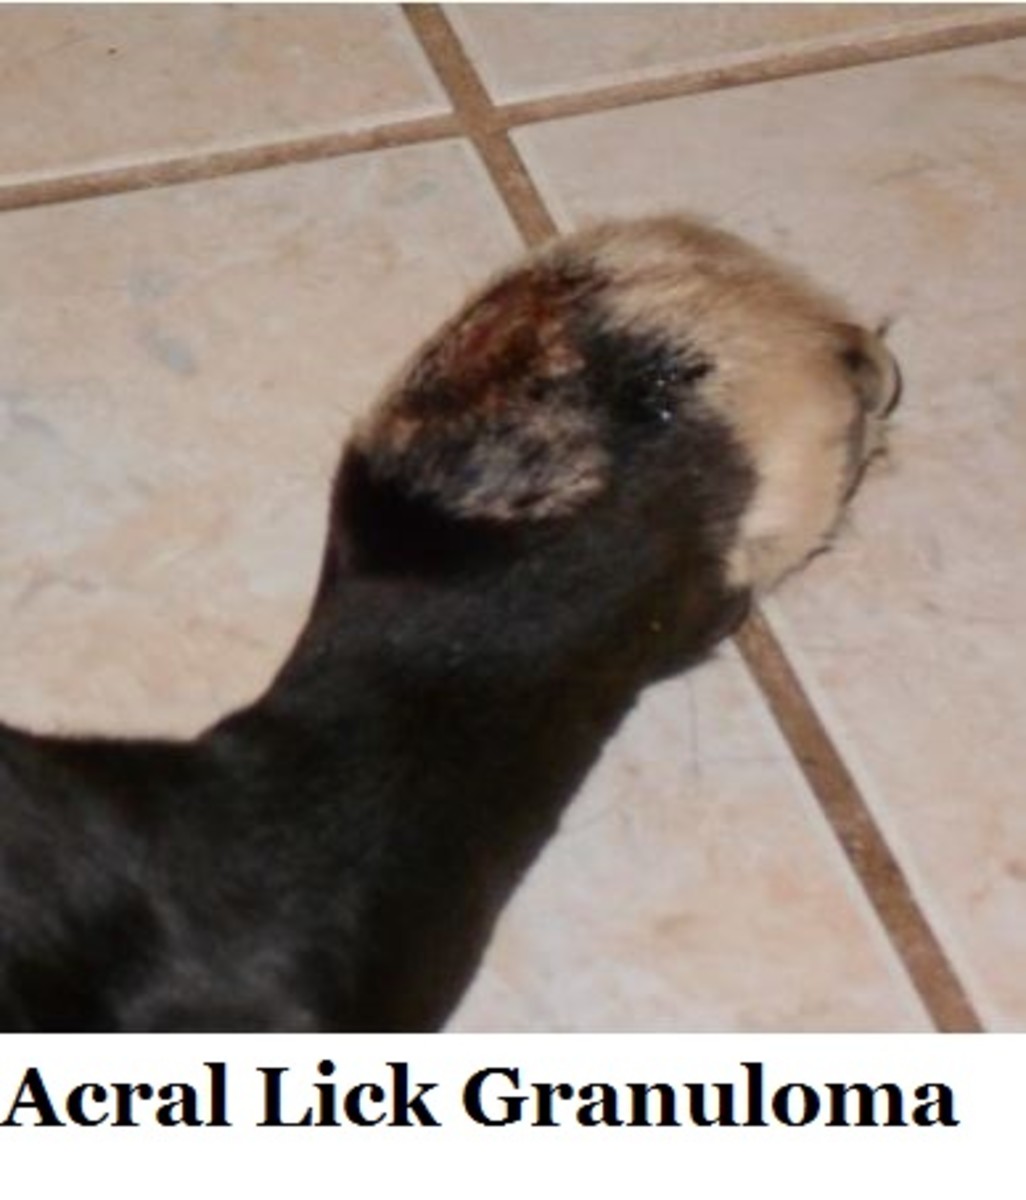 how do you stop a dog from licking a granuloma